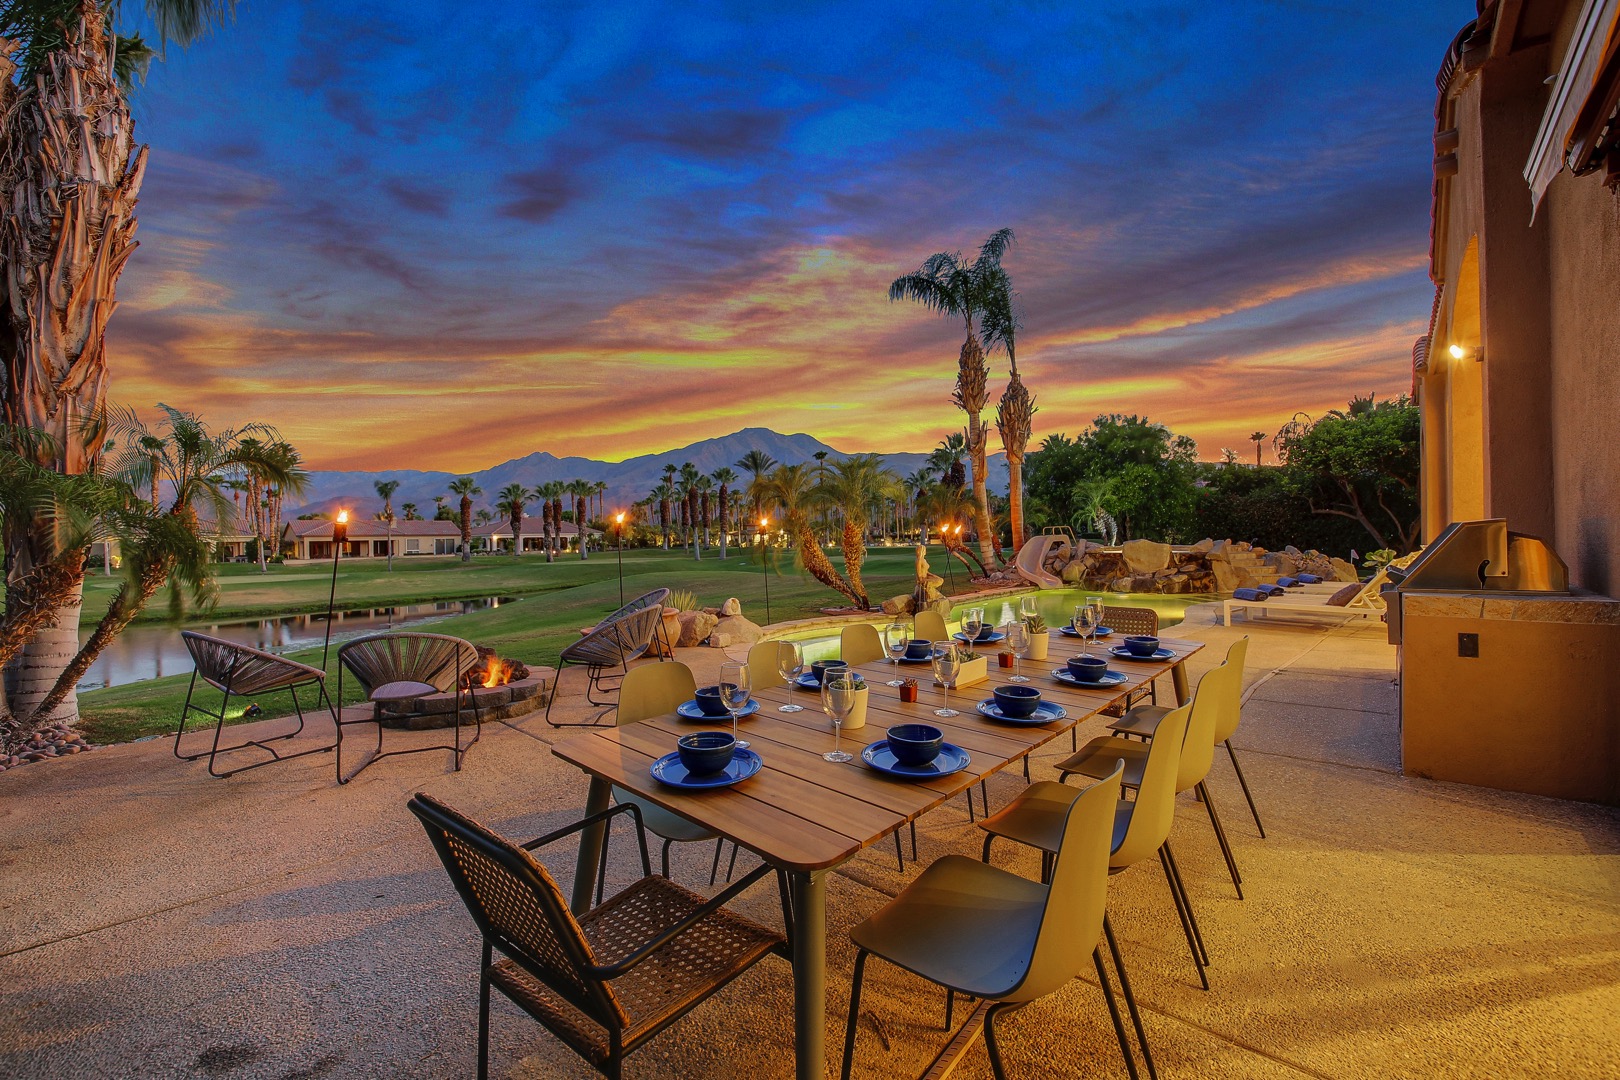 Dinner with a view! The elegant patio dinner table comfortably sits 10 and is located right outside the dinning room.